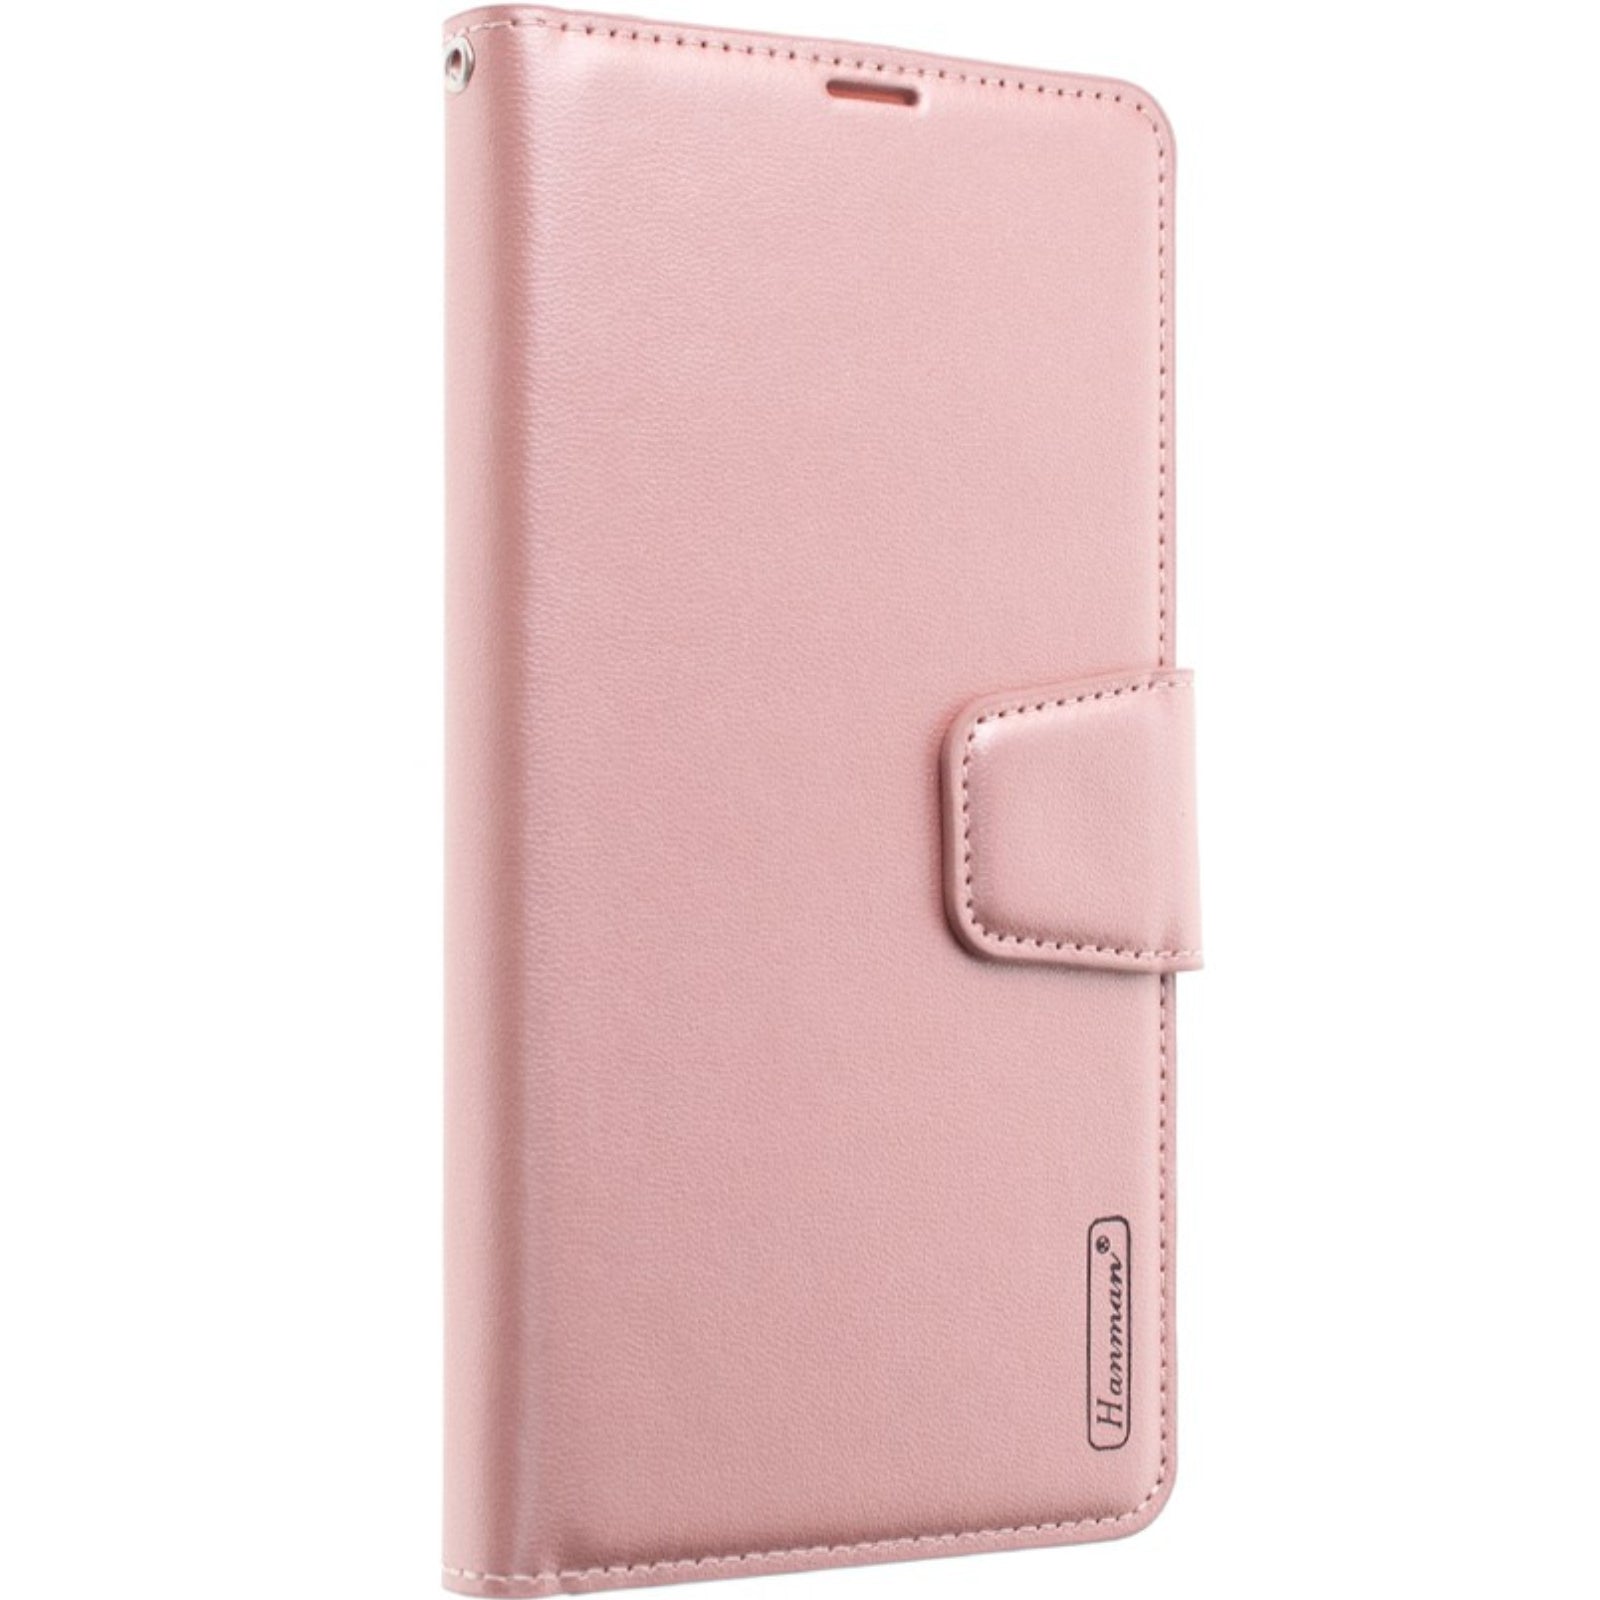 Hanman Pu Flip Leather Wallet Cover Case For Iphone 14 Pro Max